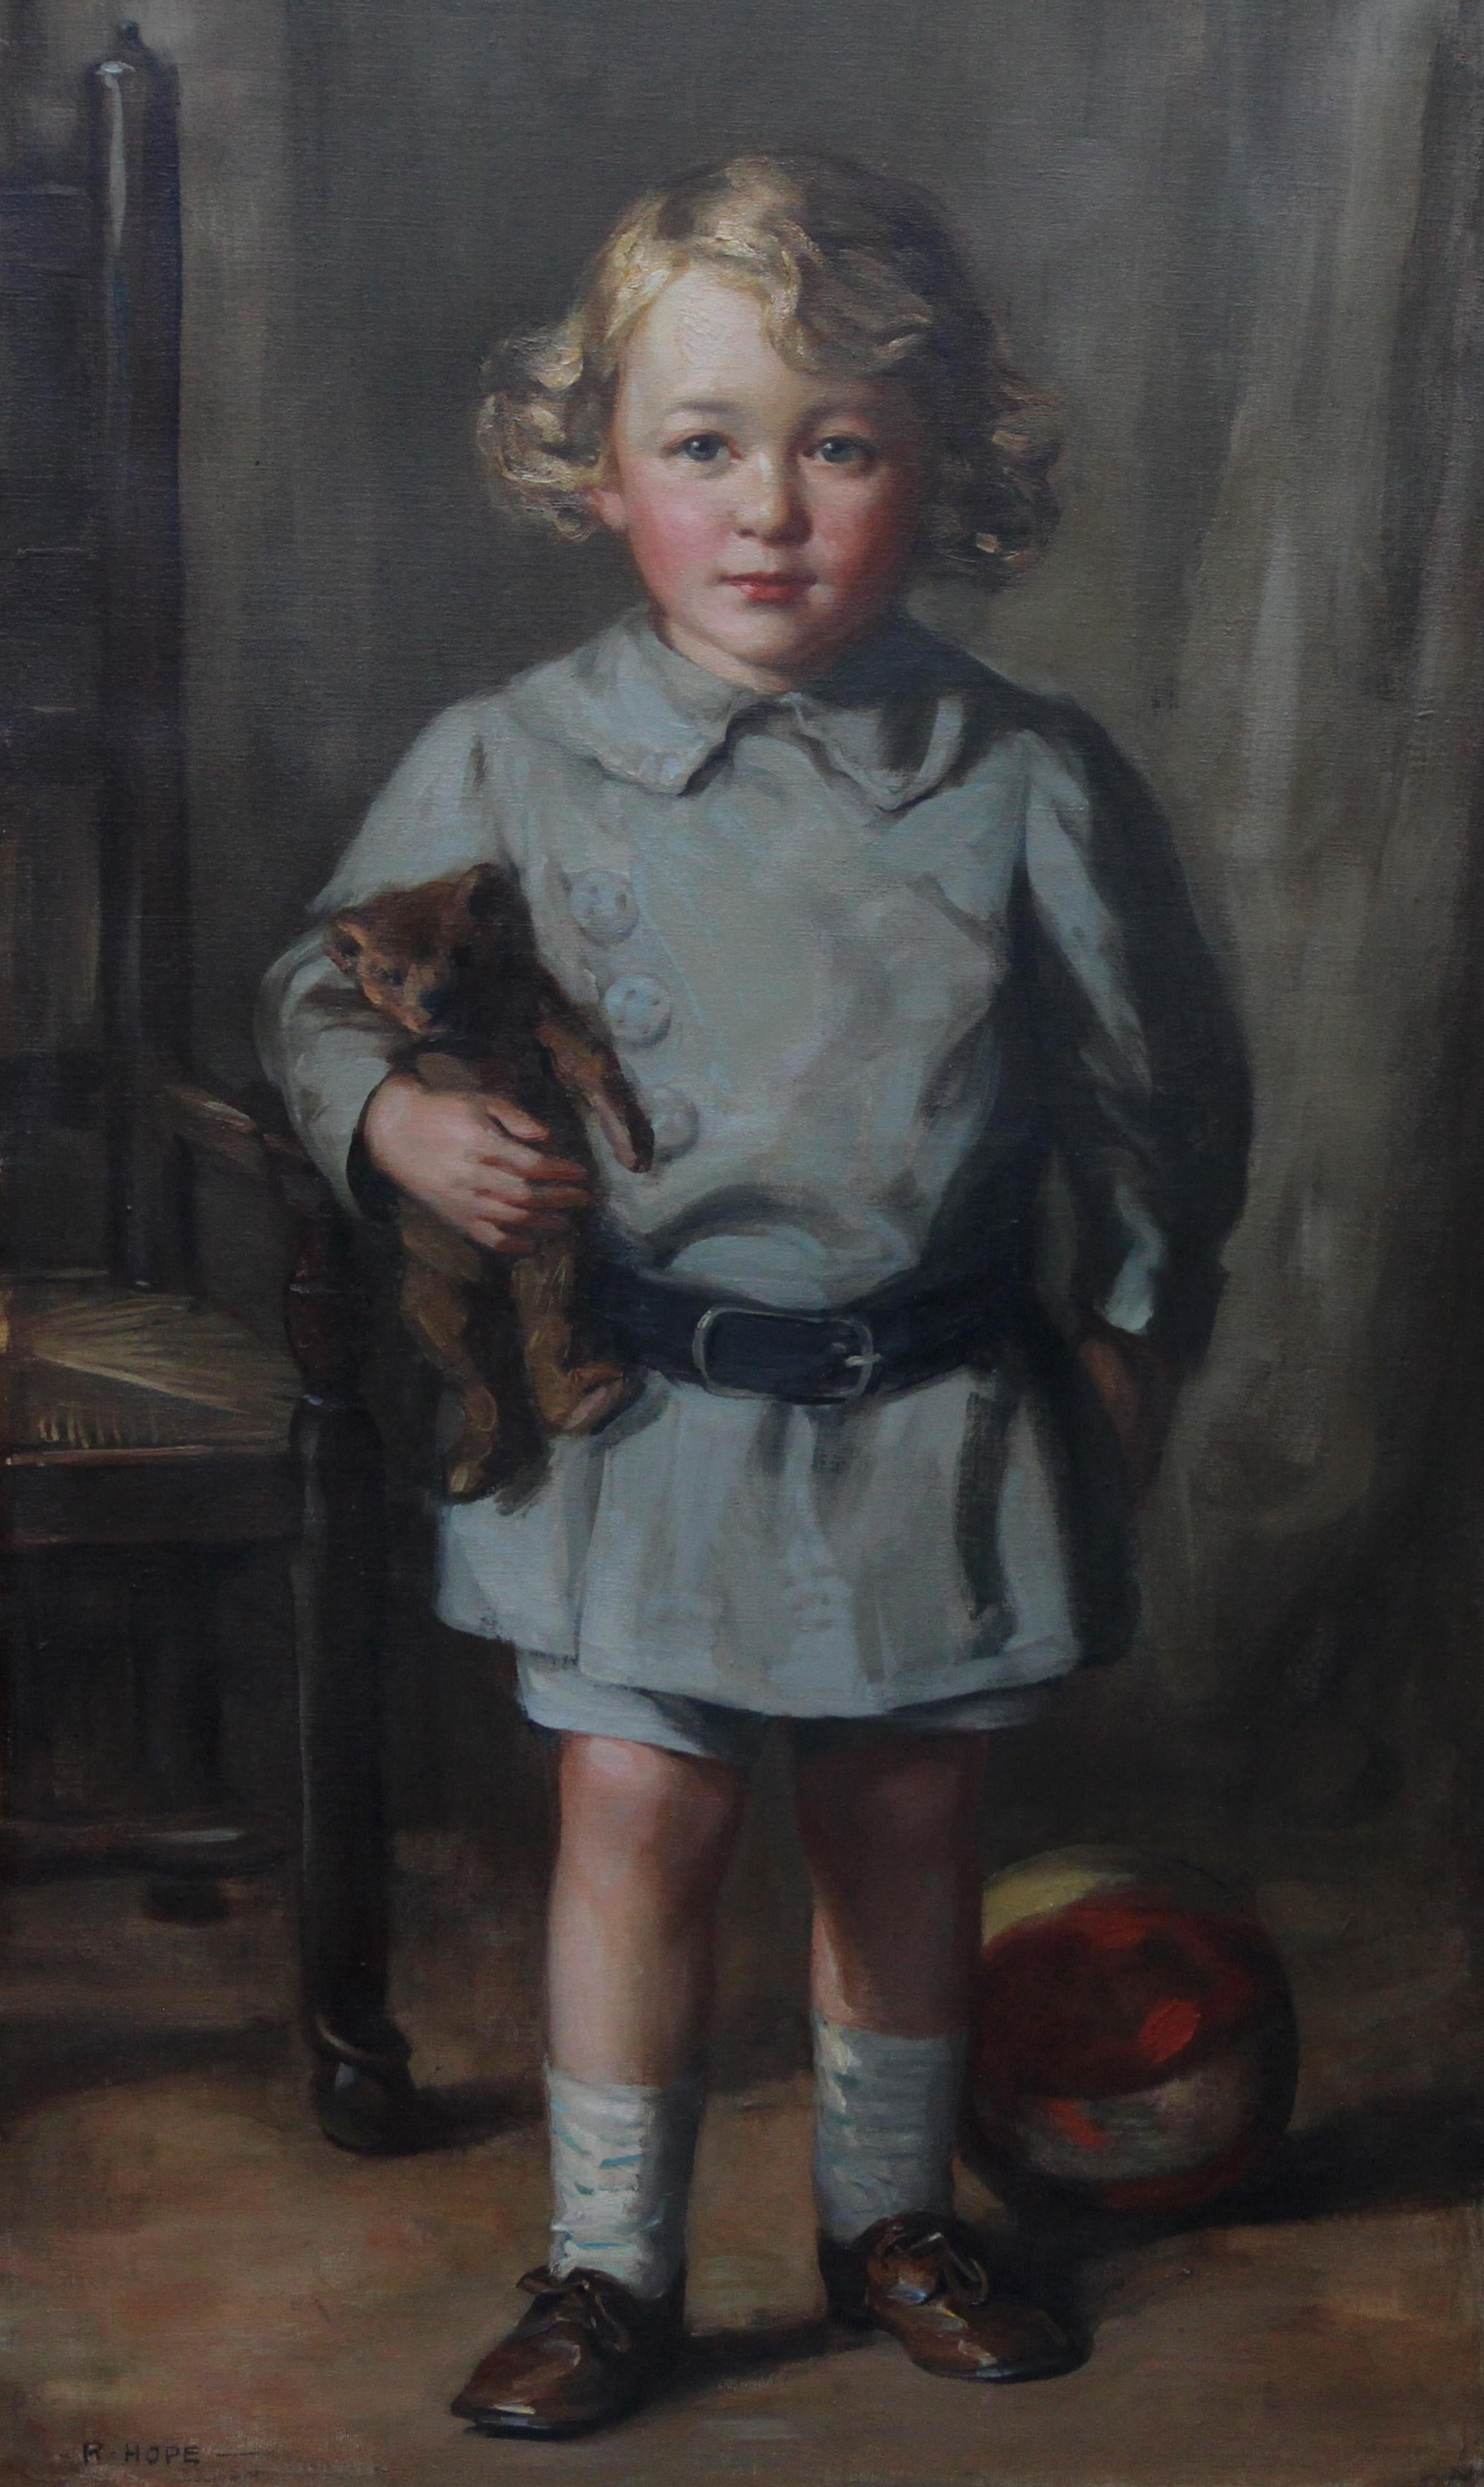 Portrait of a Boy with Teddy Bear - Scottish Art exh. RSA Portrait Oil Ppainting - Painting by Robert Hope